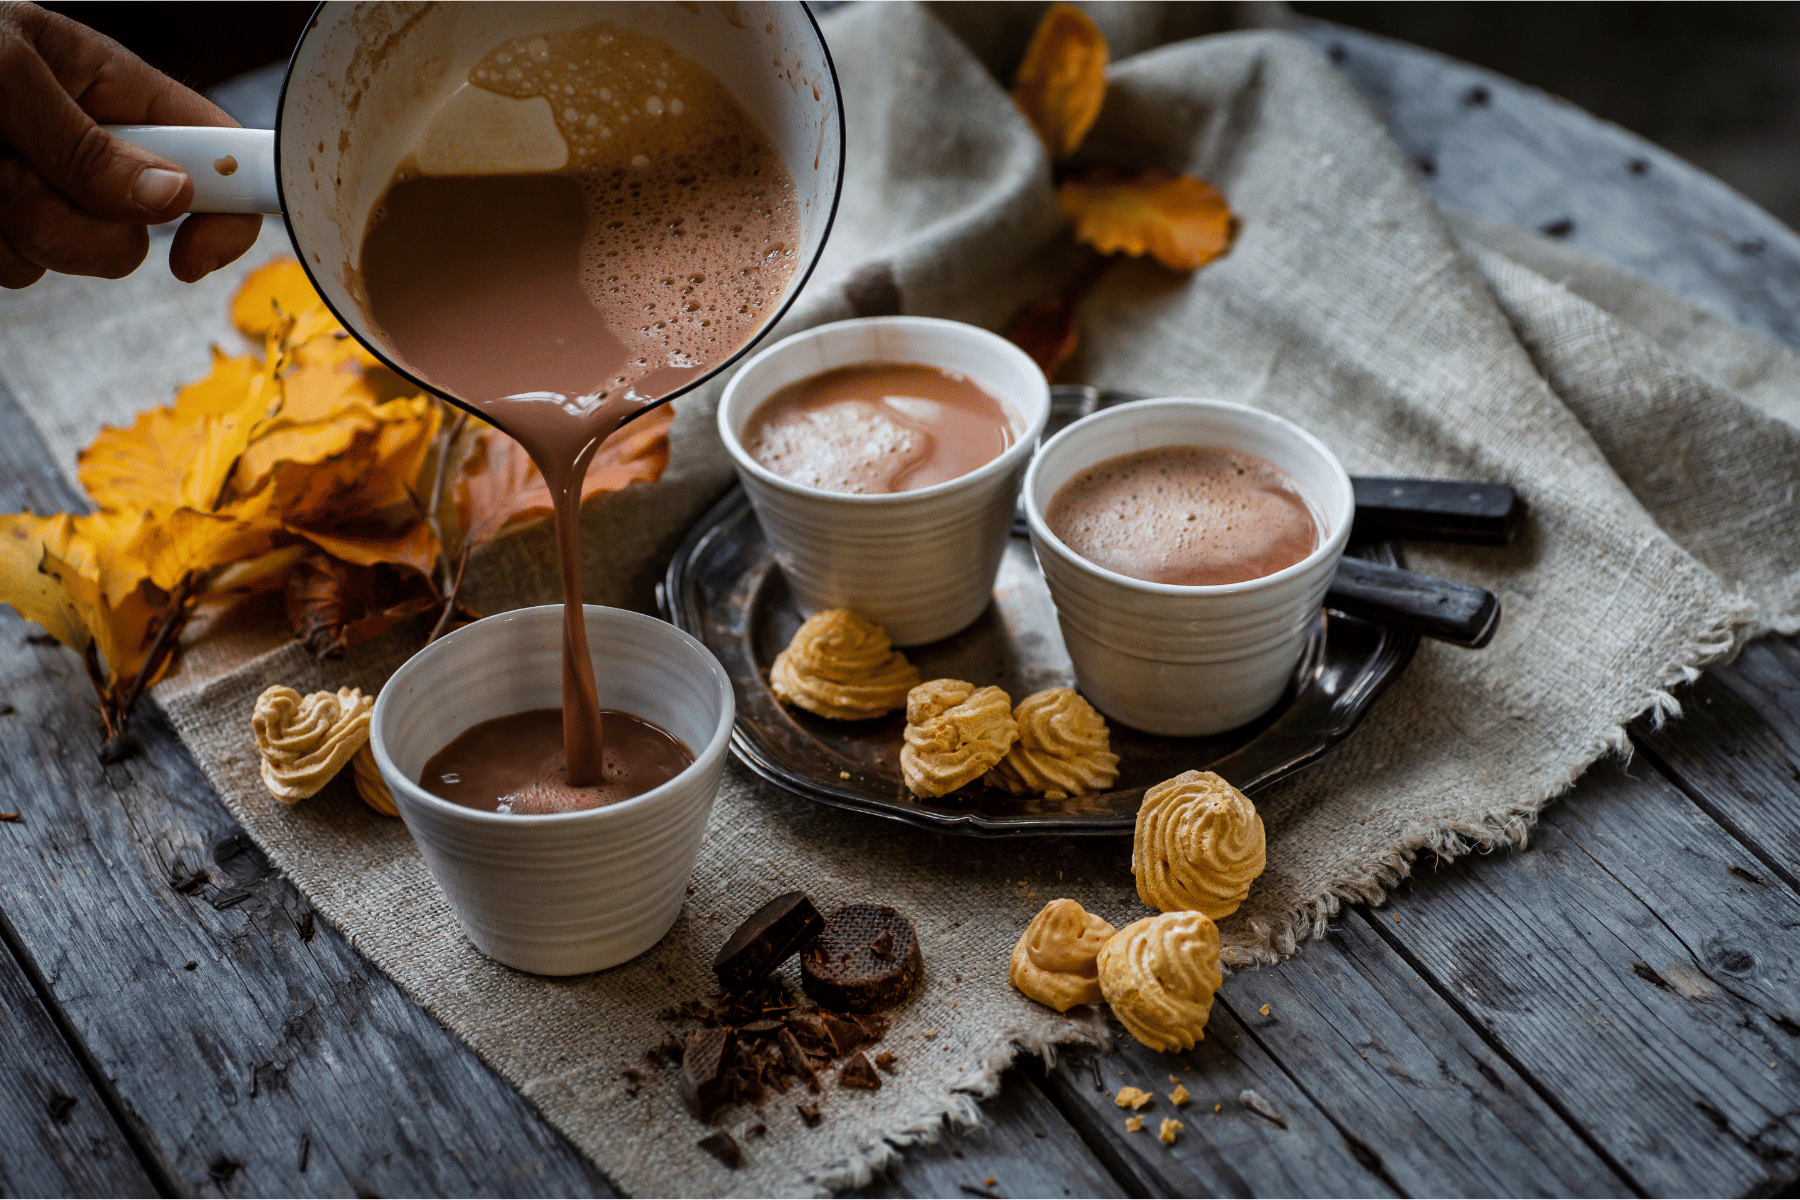 hot chocolate catering